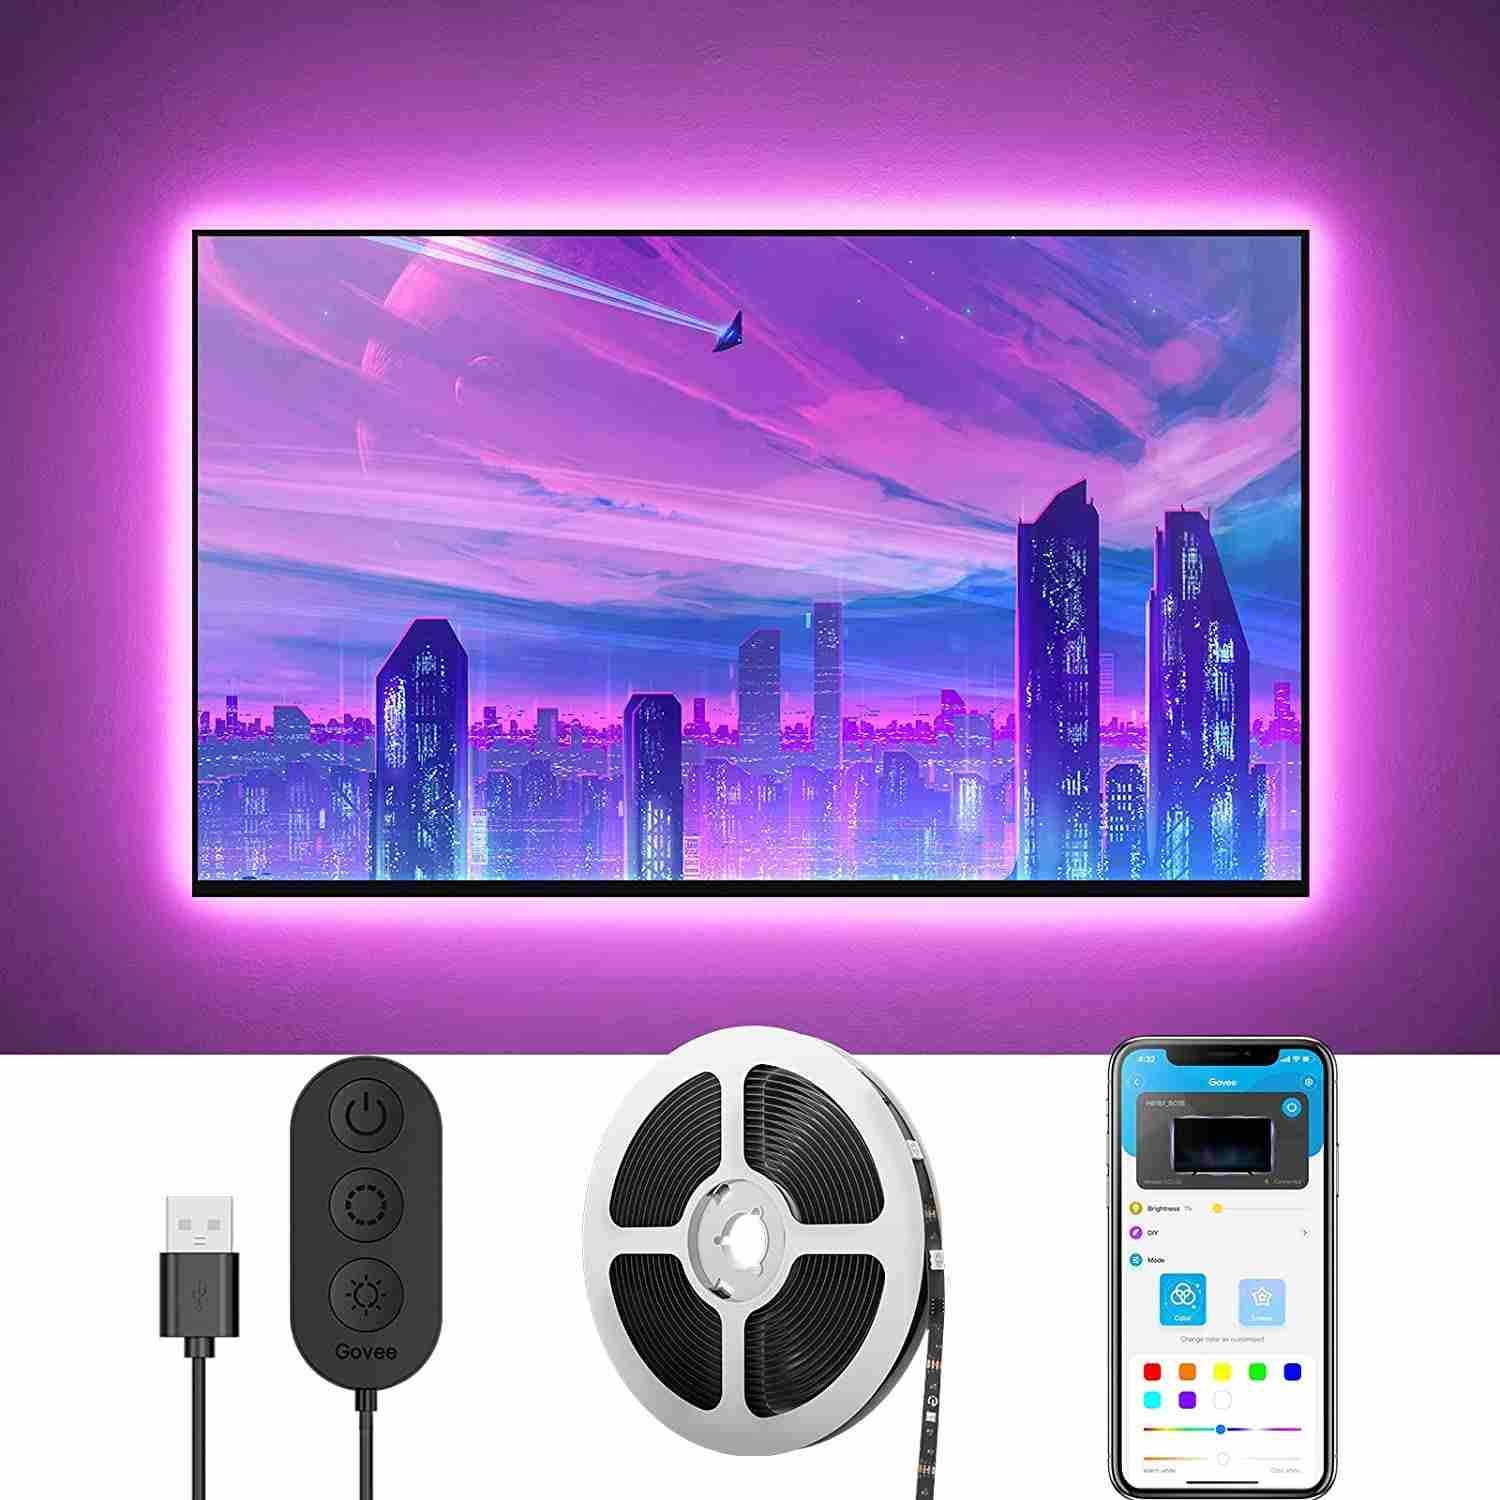 Govee RGB LED TV Backlights for 46-60 inch TVs - Store 974 | ستور ٩٧٤